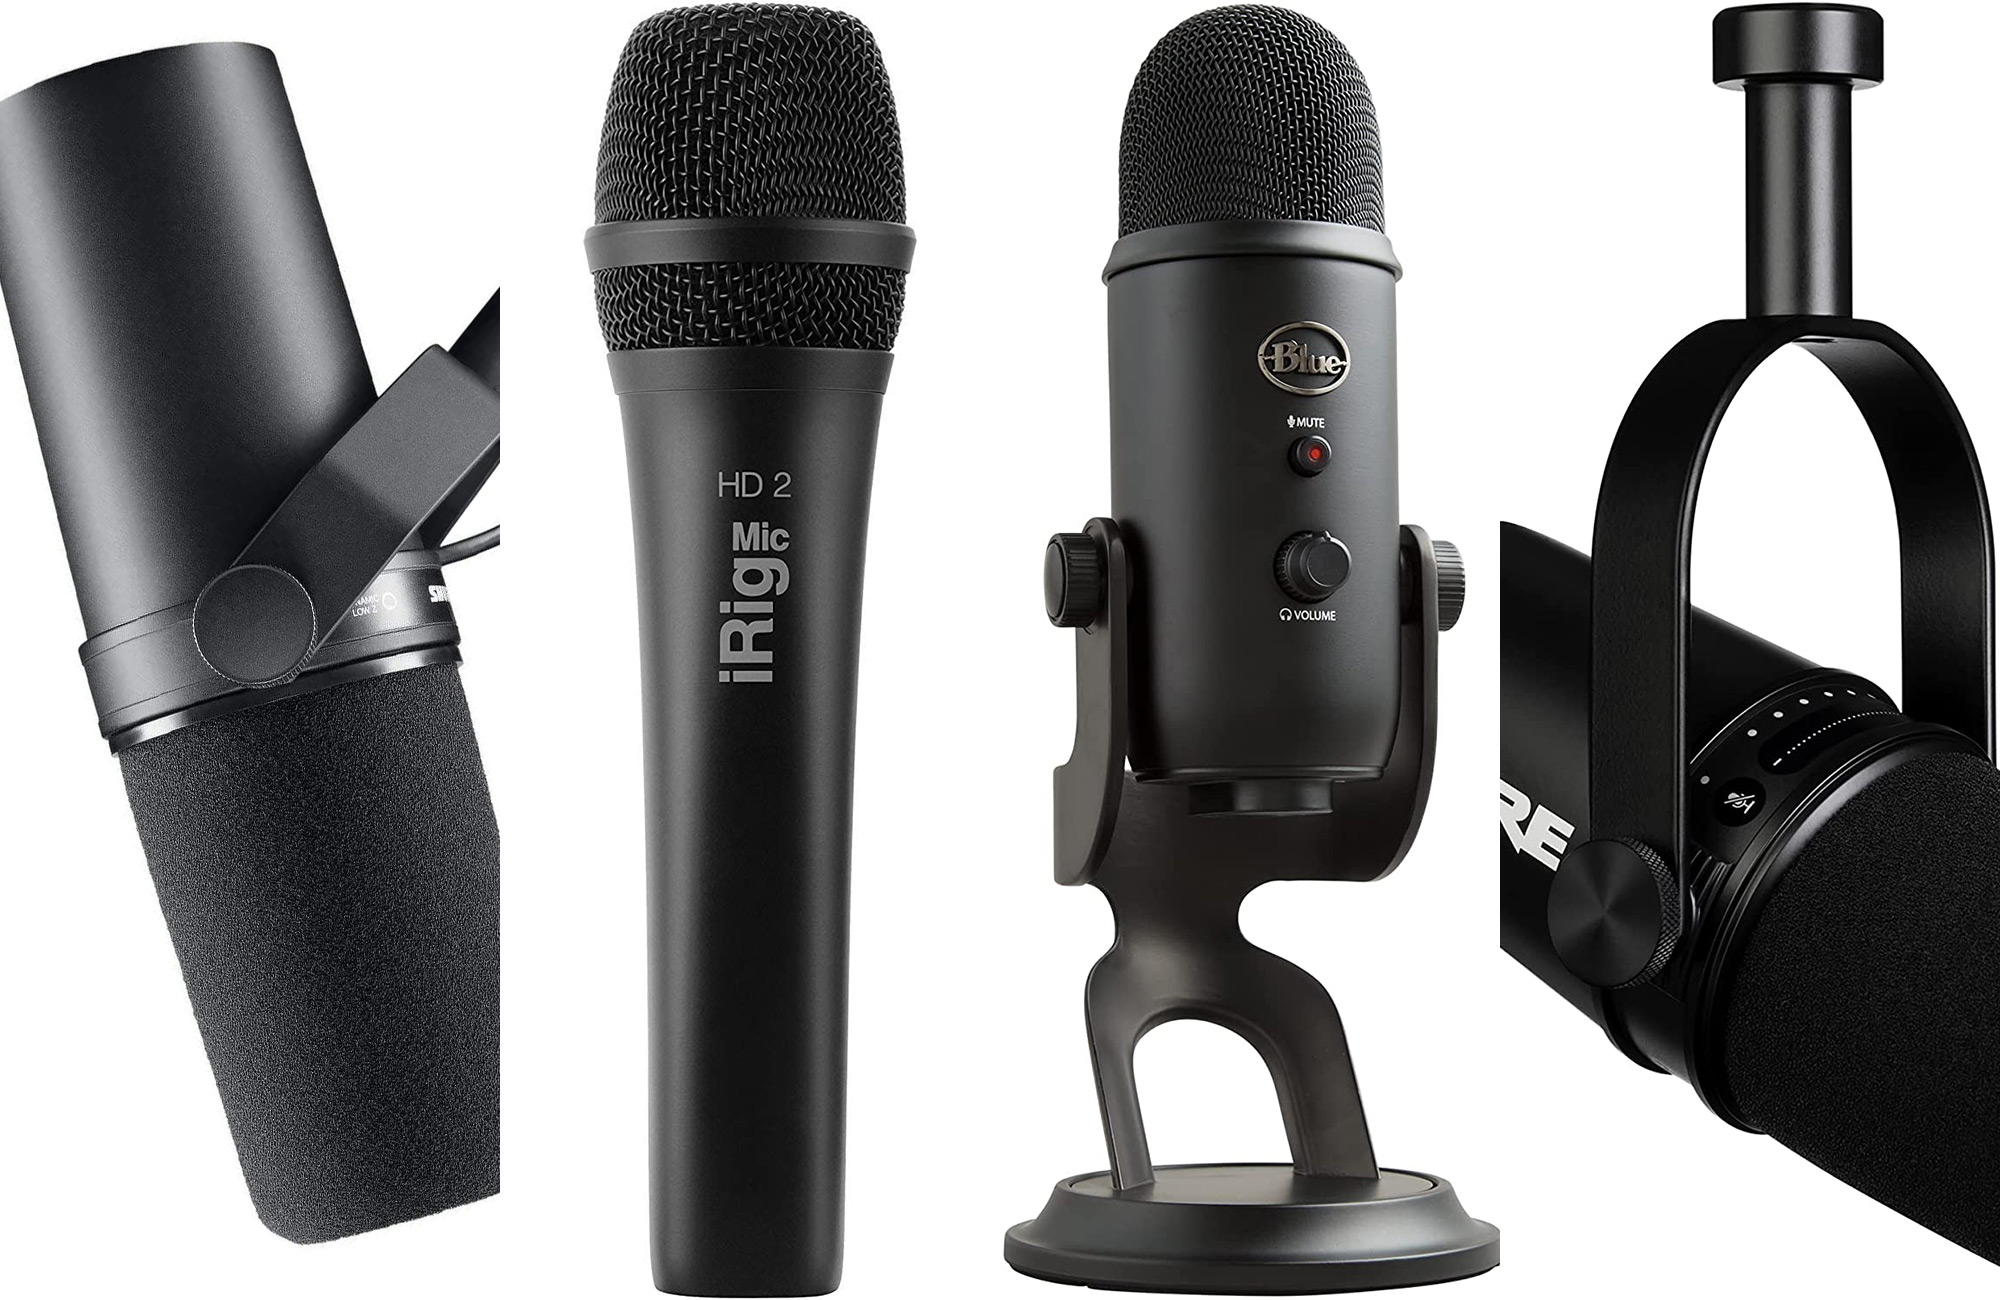 30 of the Best Podcast Microphones (For Any Budget) - Discover the